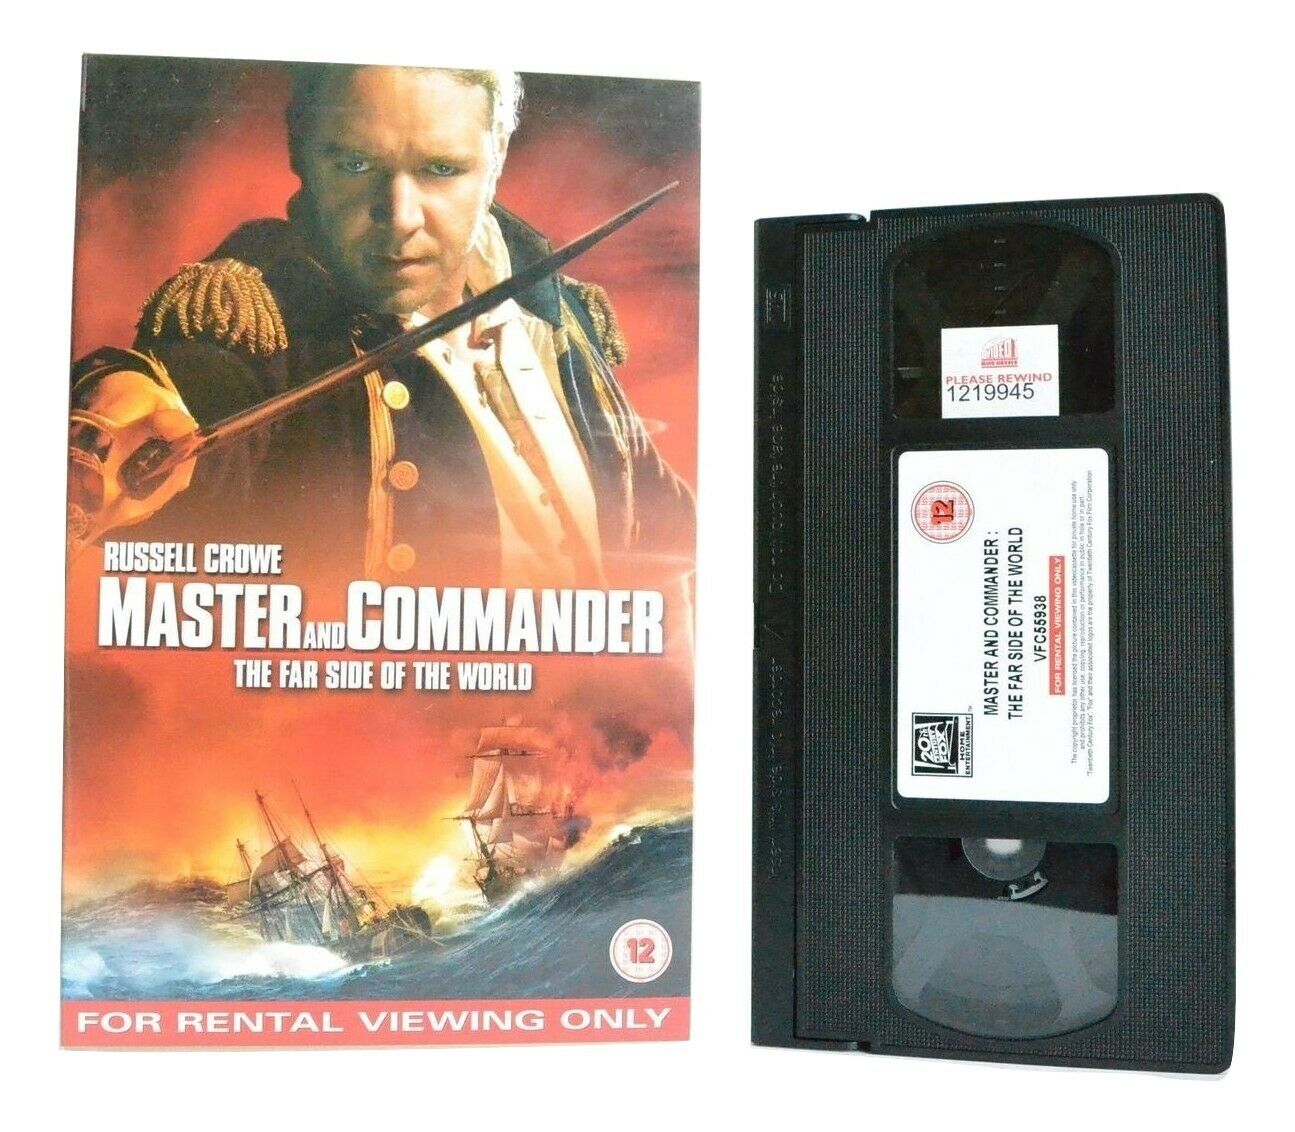 Master And Commander: The Far Side Of The World - War Drama - R.Crowe - Pal VHS-